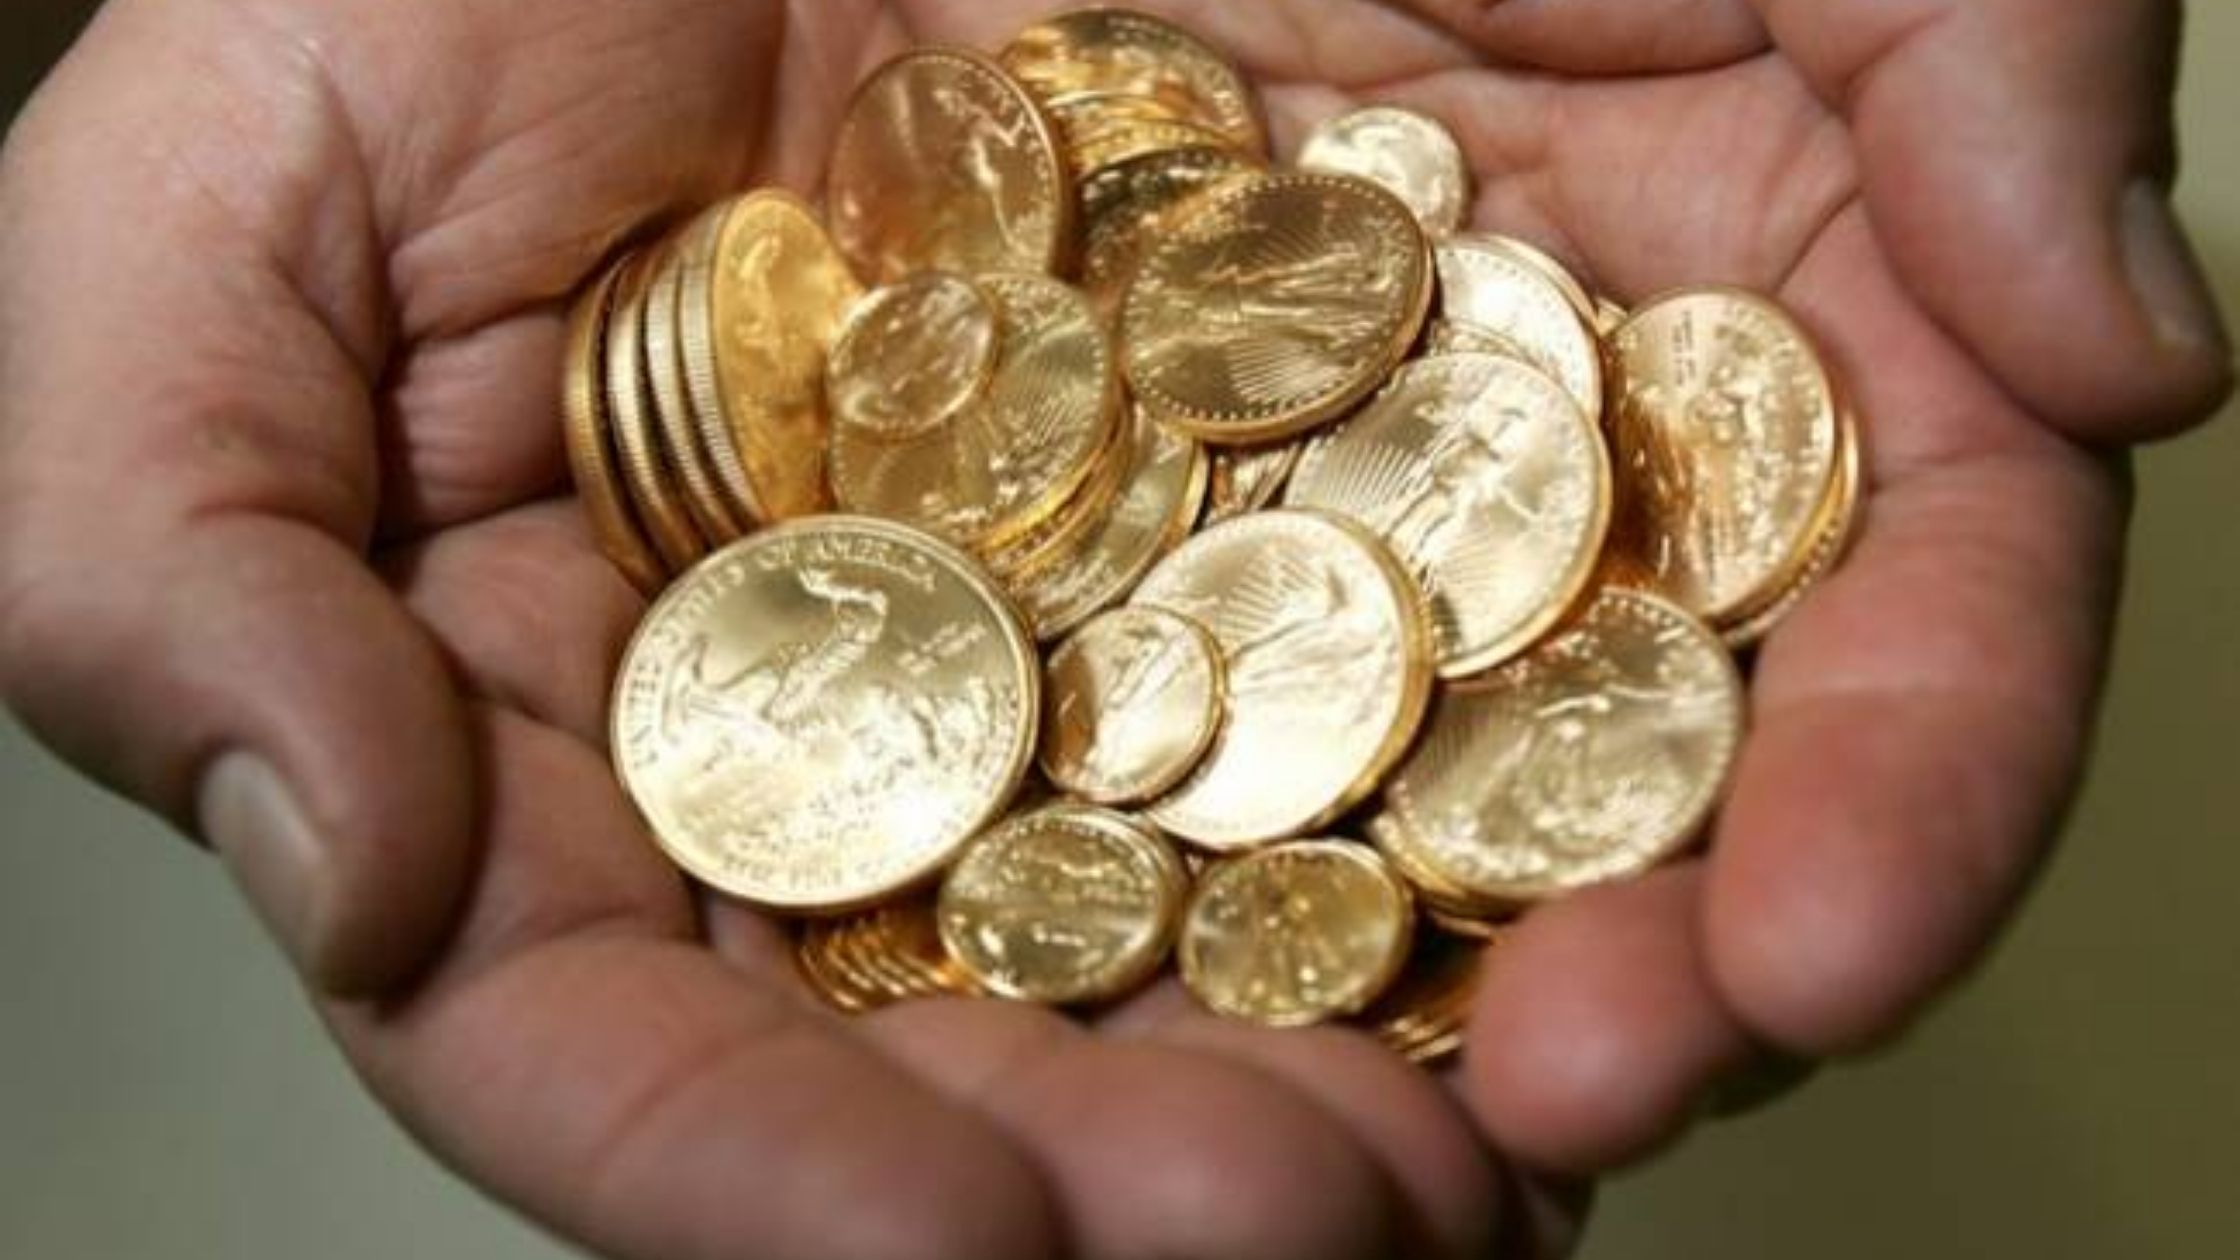 Of which treasure are these rare gold coins